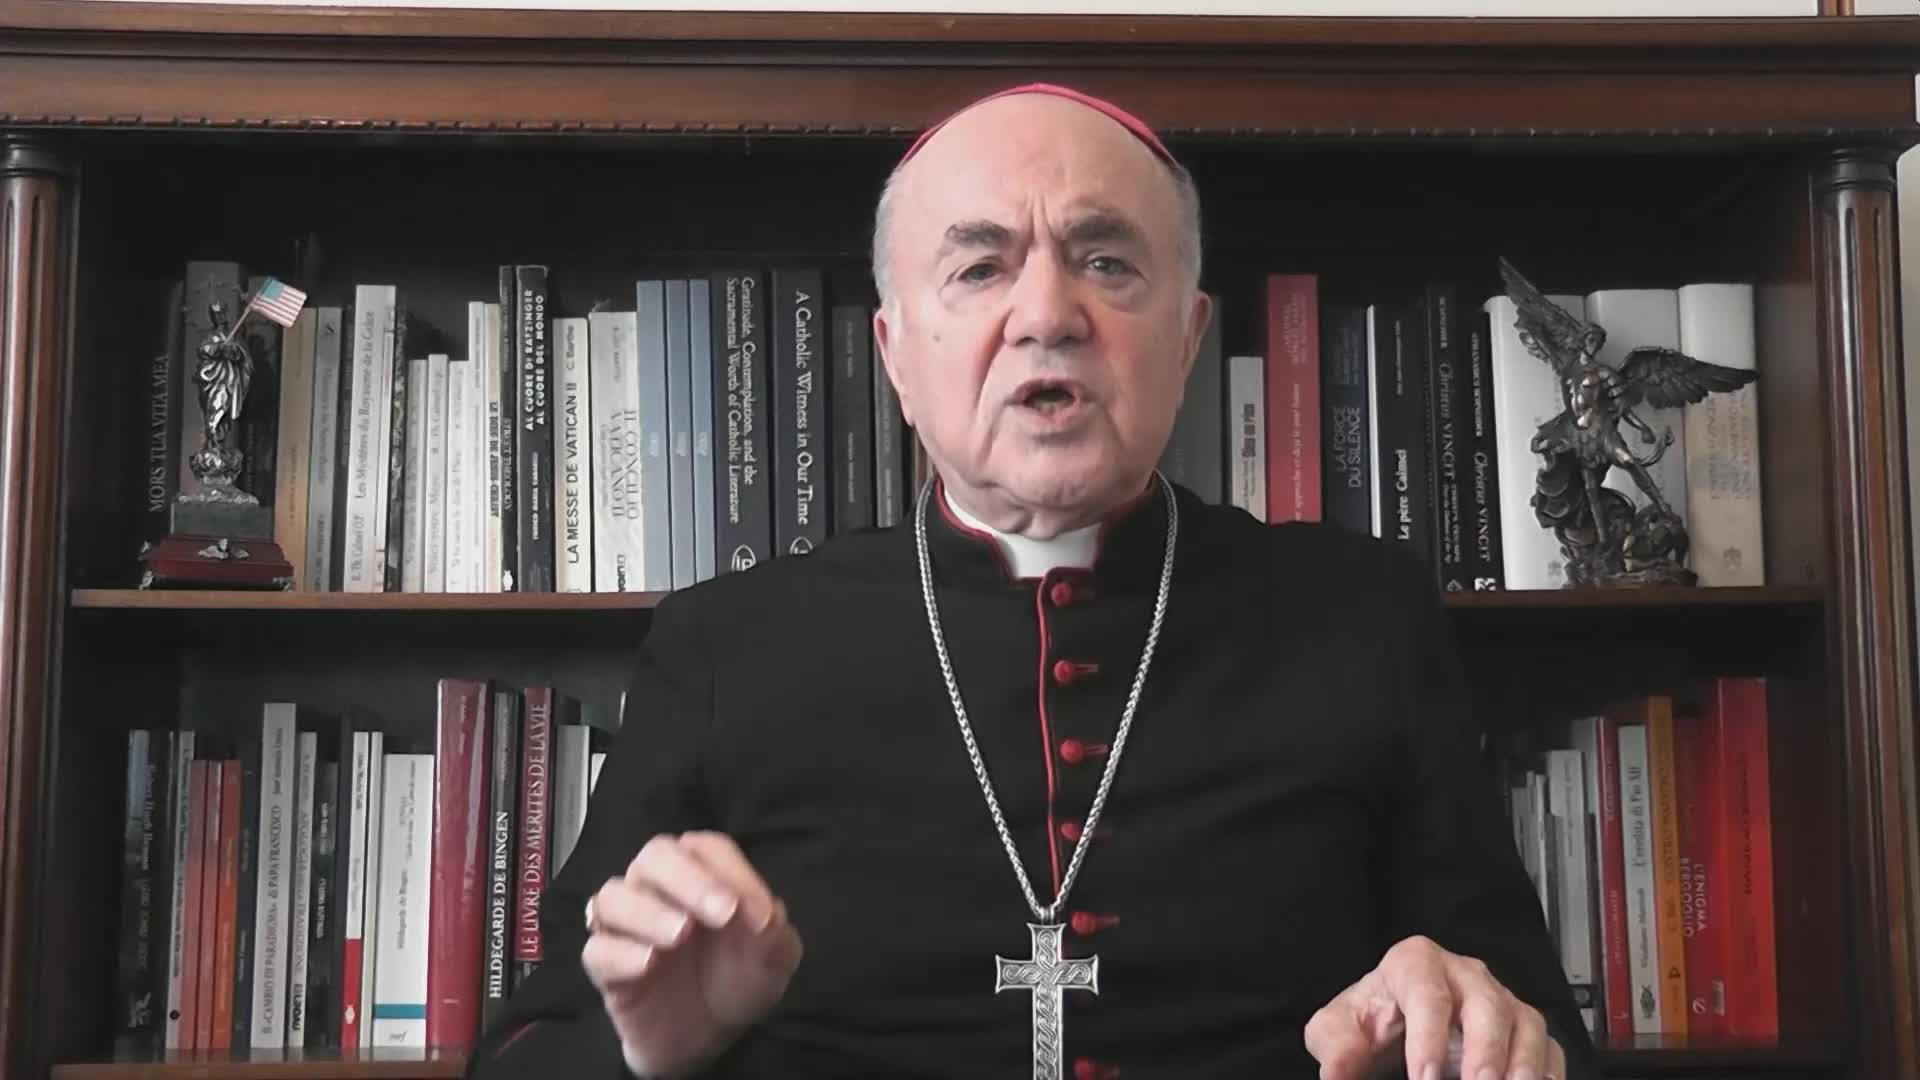 IN THE SPIRIT OF ST. PAUL: THE CATHOLIC DUTY TO RESIST FRANCIS - Archbishop Carlo Maria Viganò